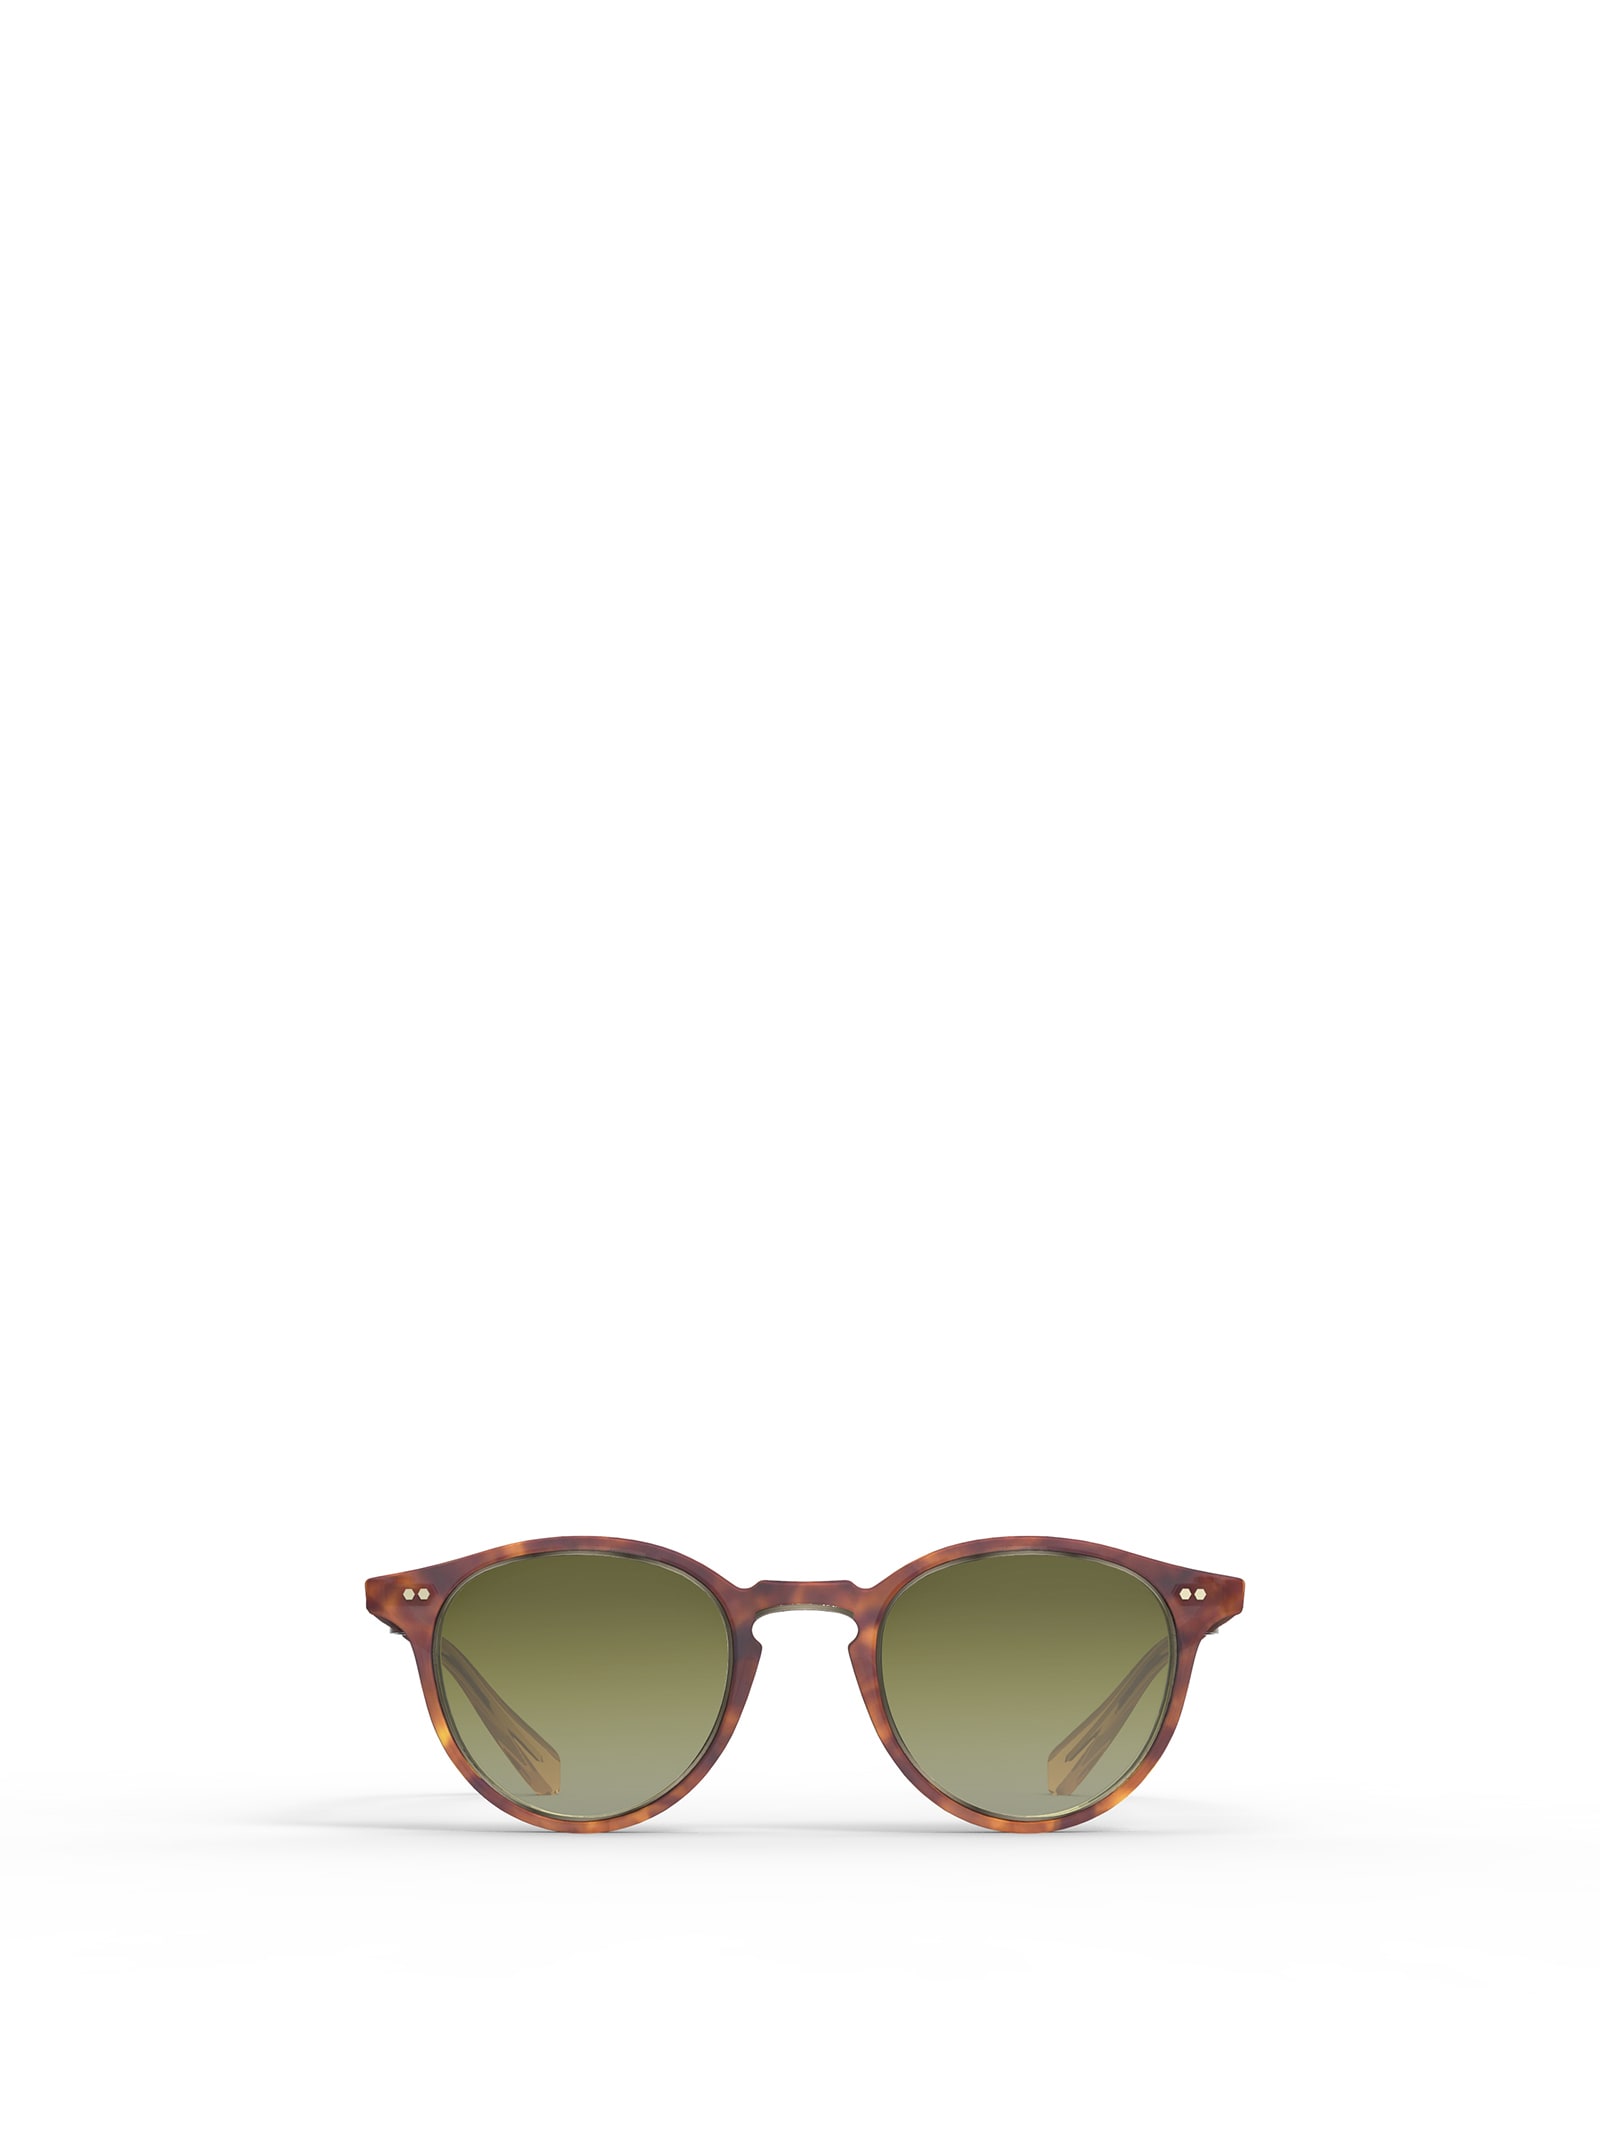 MR LEIGHT MARMONT II S CACAO TORTOISE-ANTIQUE GOLD SUNGLASSES